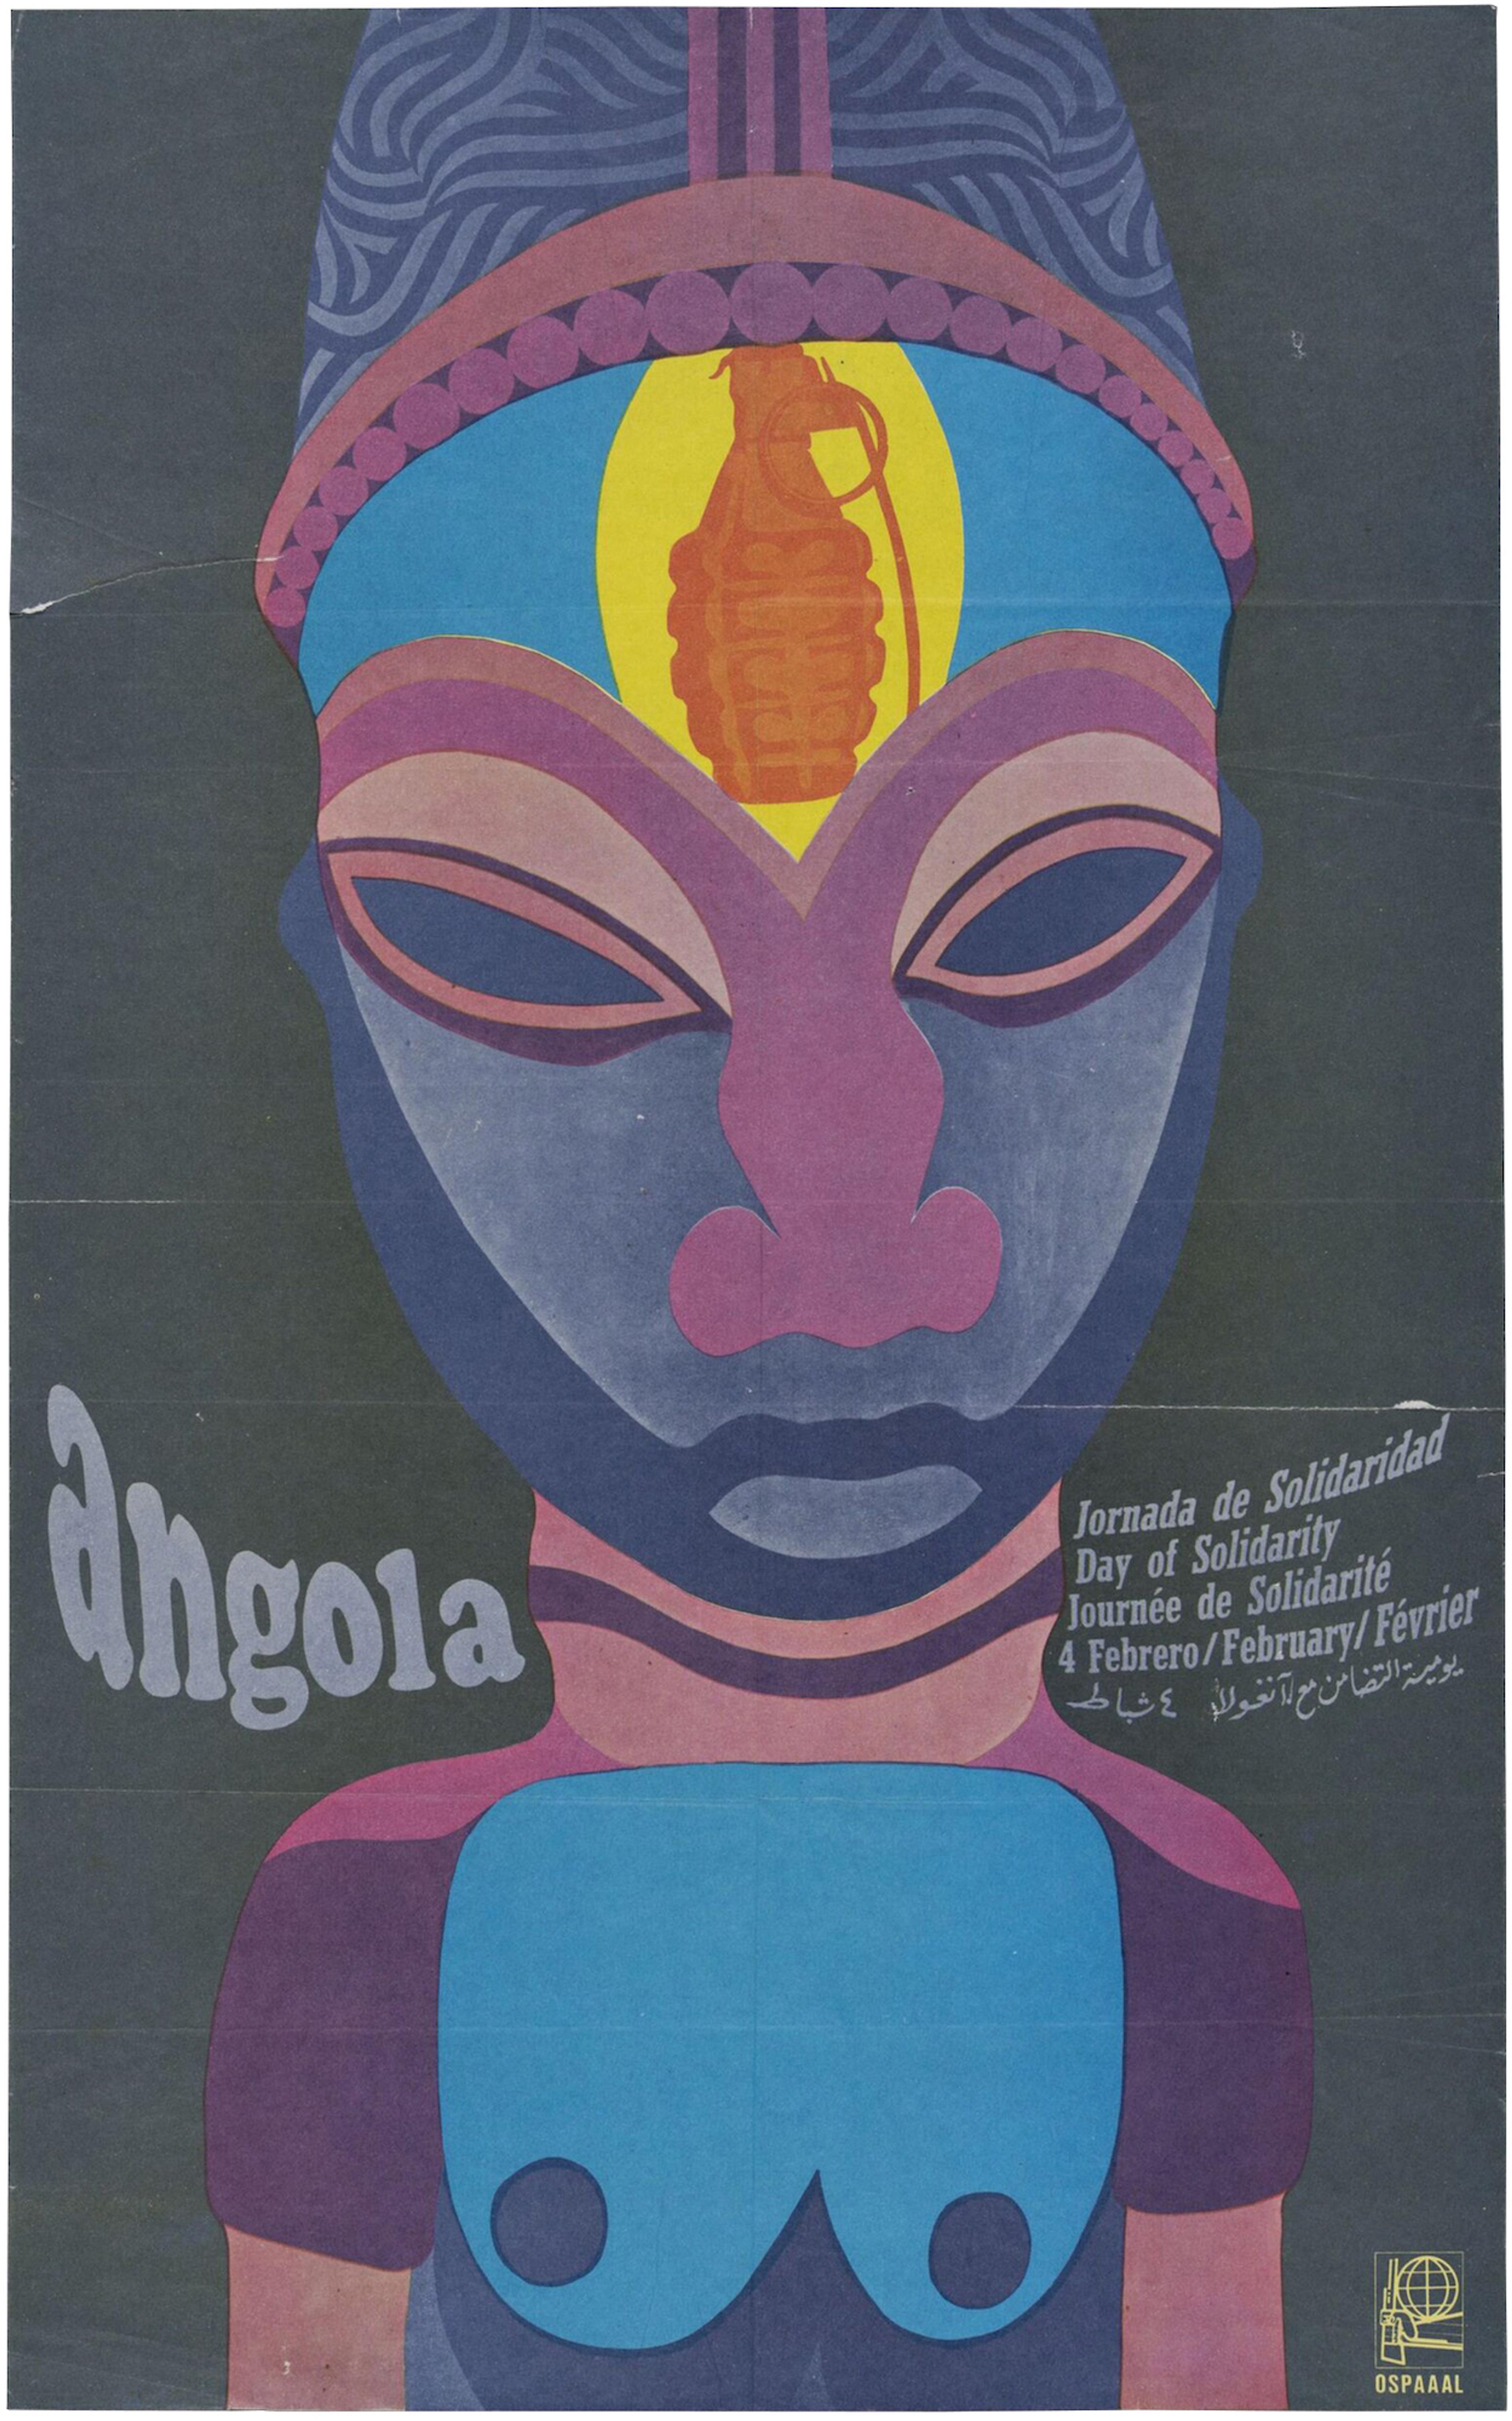 Offset lithographic poster advertising a day of solidarity with Angola, 4th February 1969, depicting a figure with a grenade on the forehead.